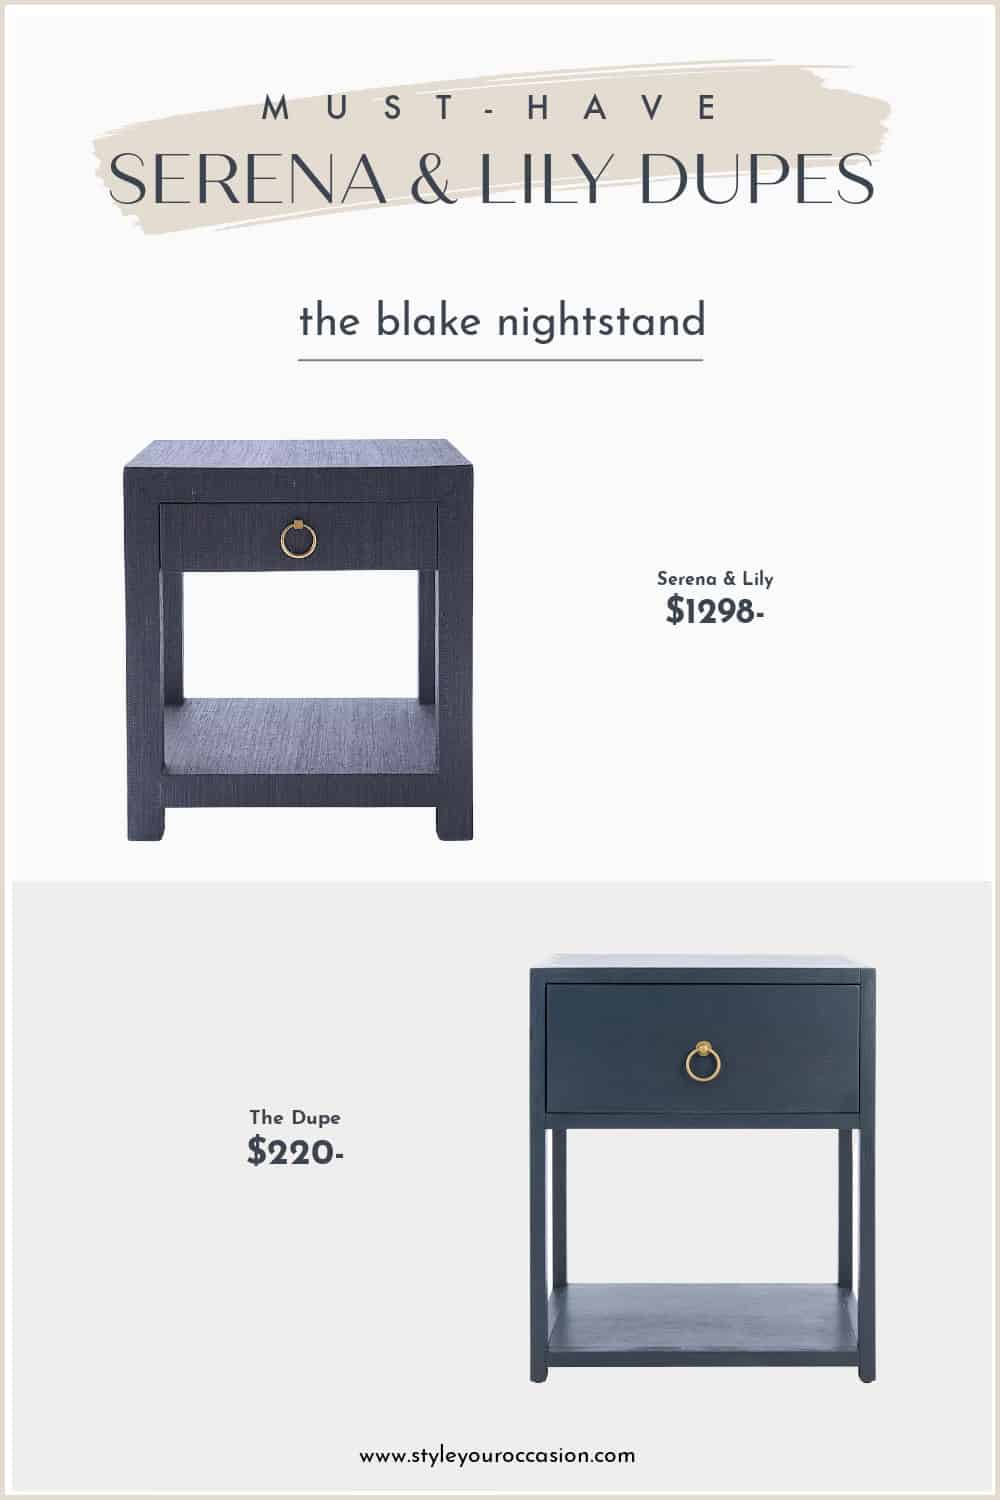 image comparing two navy blue nightstands, one Serena and Lily dupe and the original nightstand